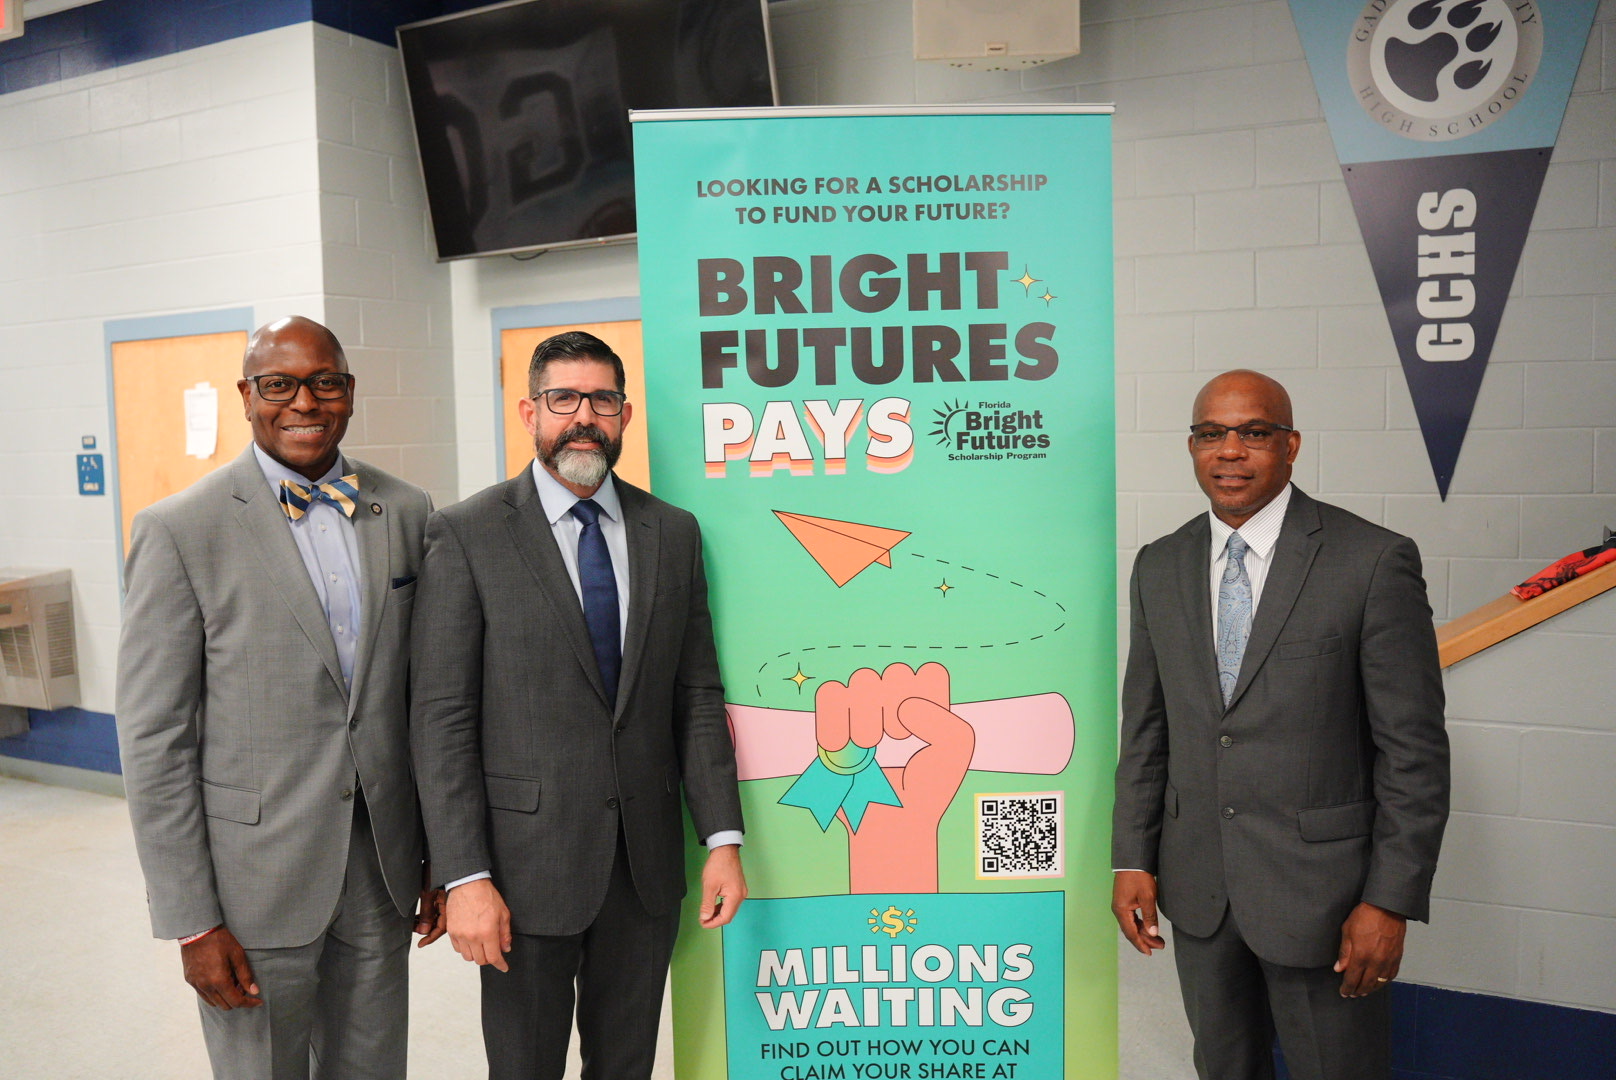 Commissioner Diaz and Secretary Davis Team Up to Inform Students About Bright Futures Scholarships